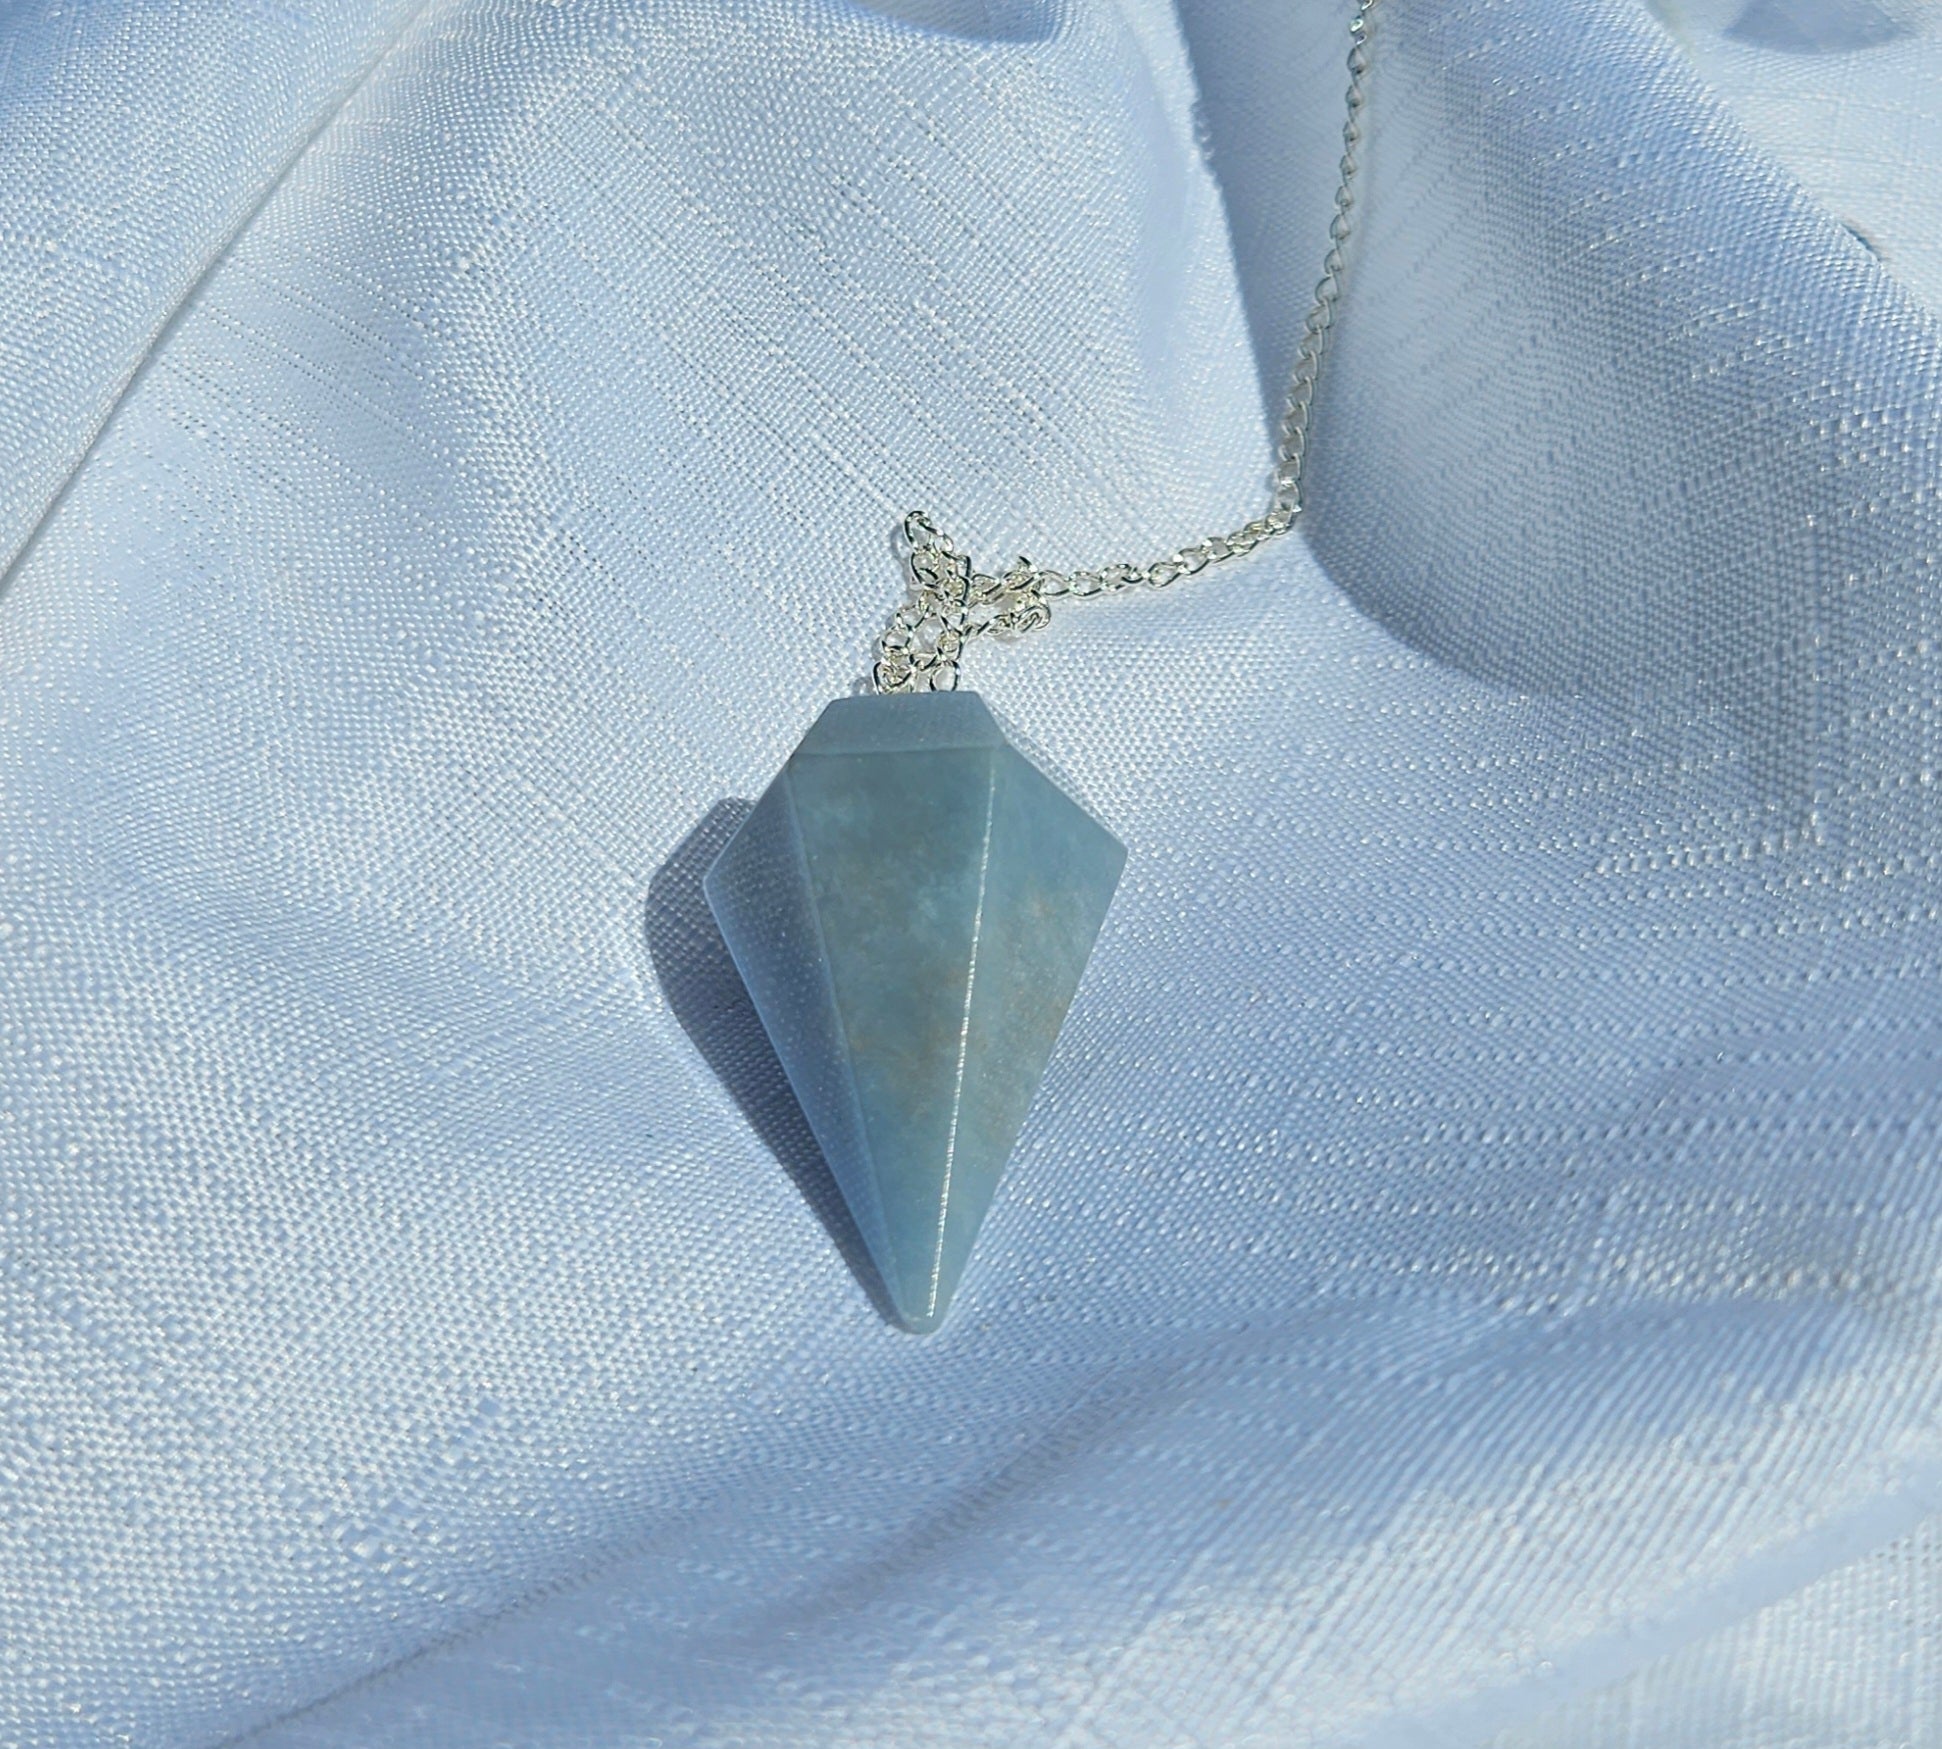 Angelite pendulum crystal for psychic readings at crystal shop in australia.